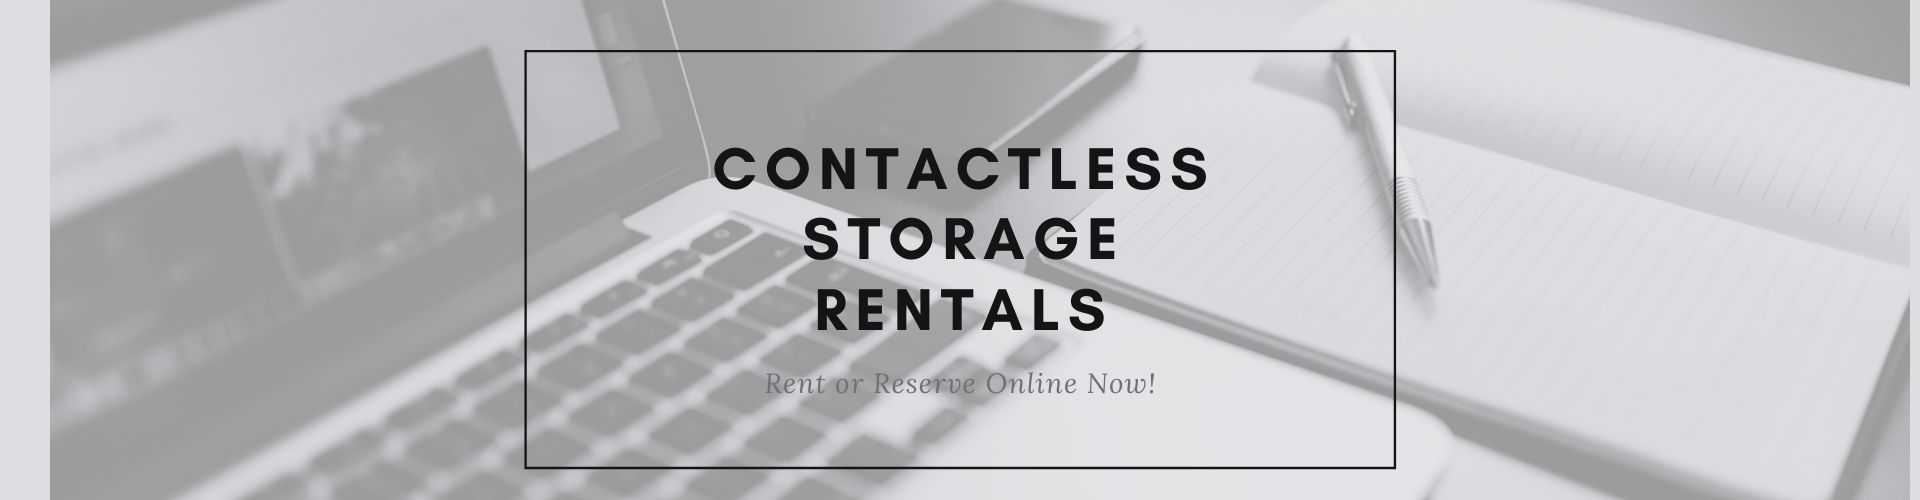 Contactless Storage Rentals in North Wales PA and MD